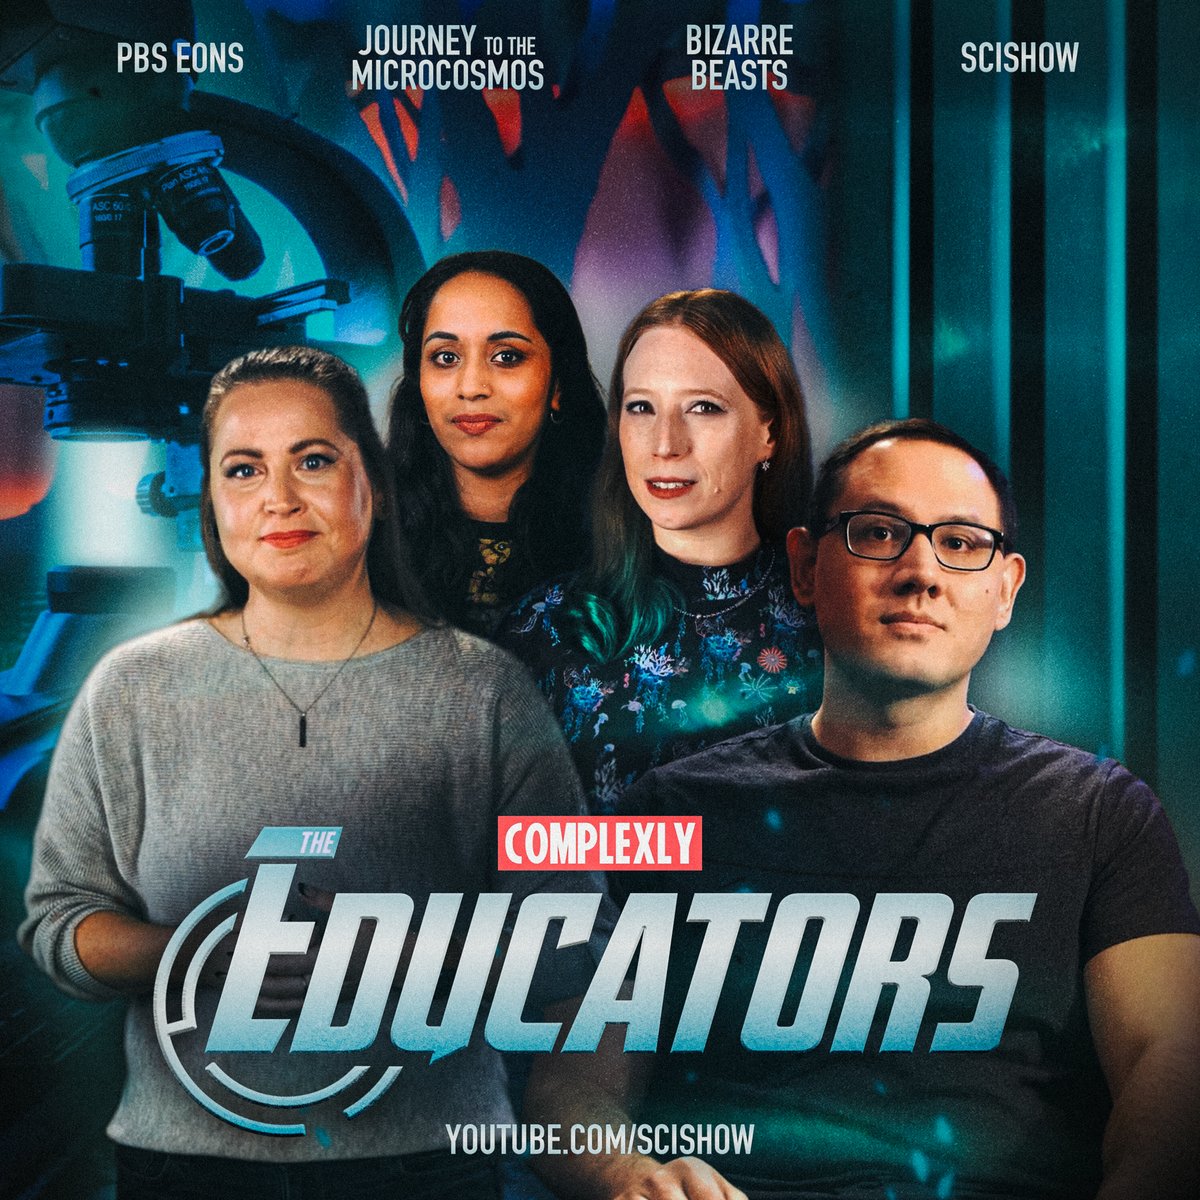 Educators assemble! We brought together four Complexly channels (@EonsShow, @SciShow, @BizarreBeasts, and @JourneyToMicro) in one epic crossover event last week! 📺: youtu.be/iD52AWJ9JQA